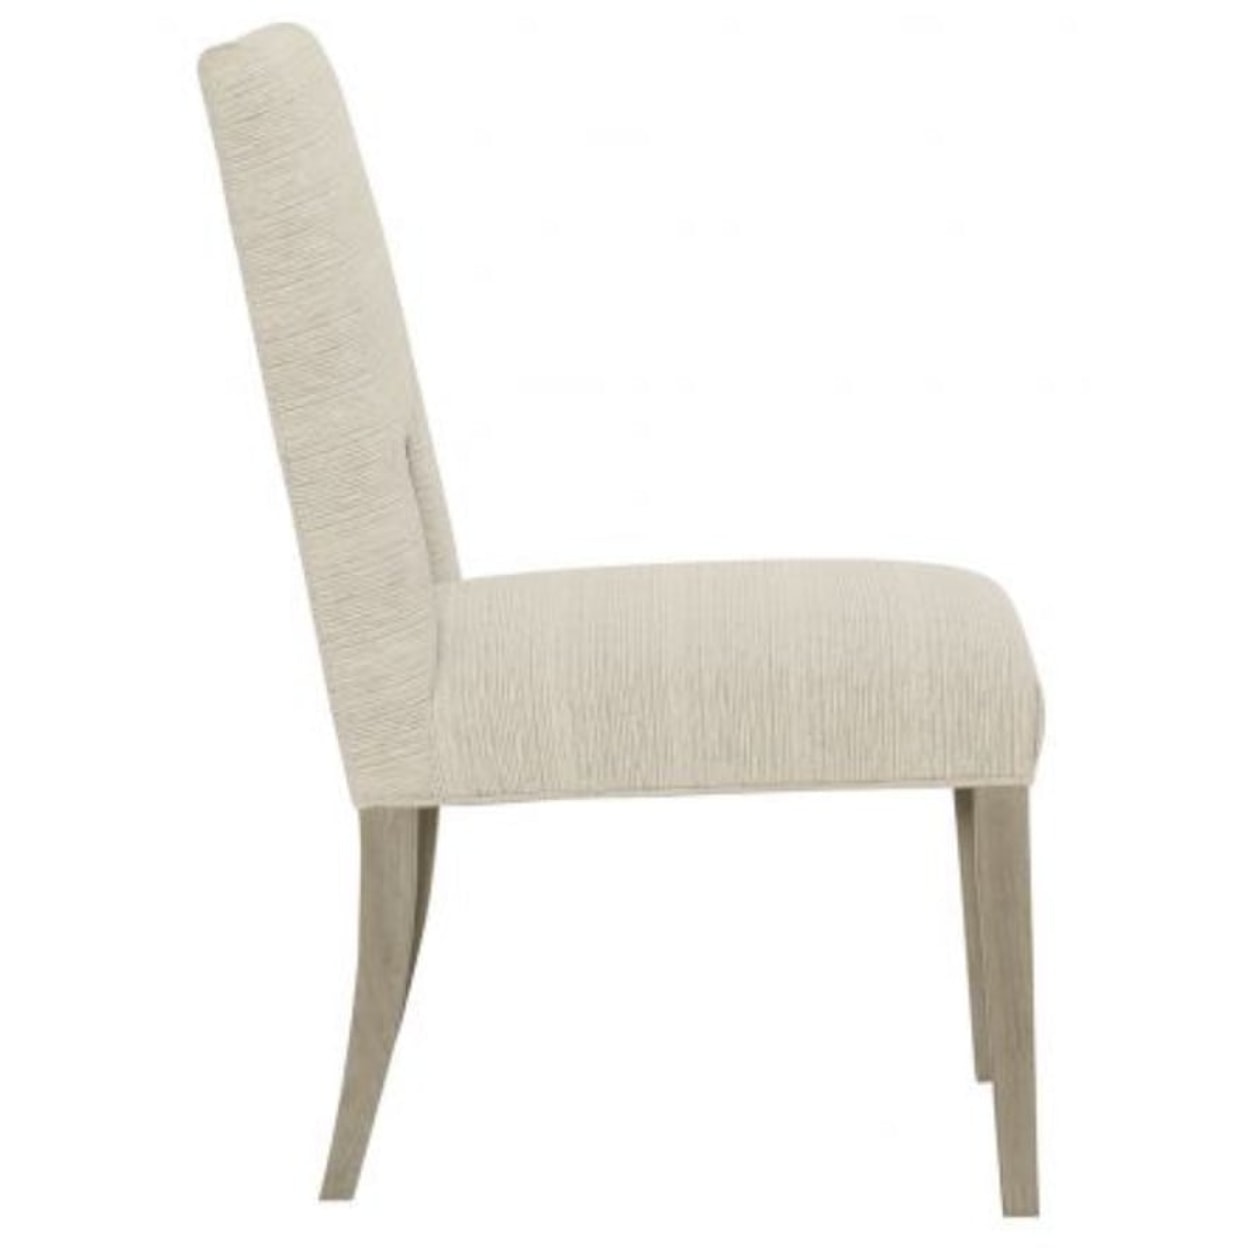 Bernhardt Chairs and Accents Mosaic Chair